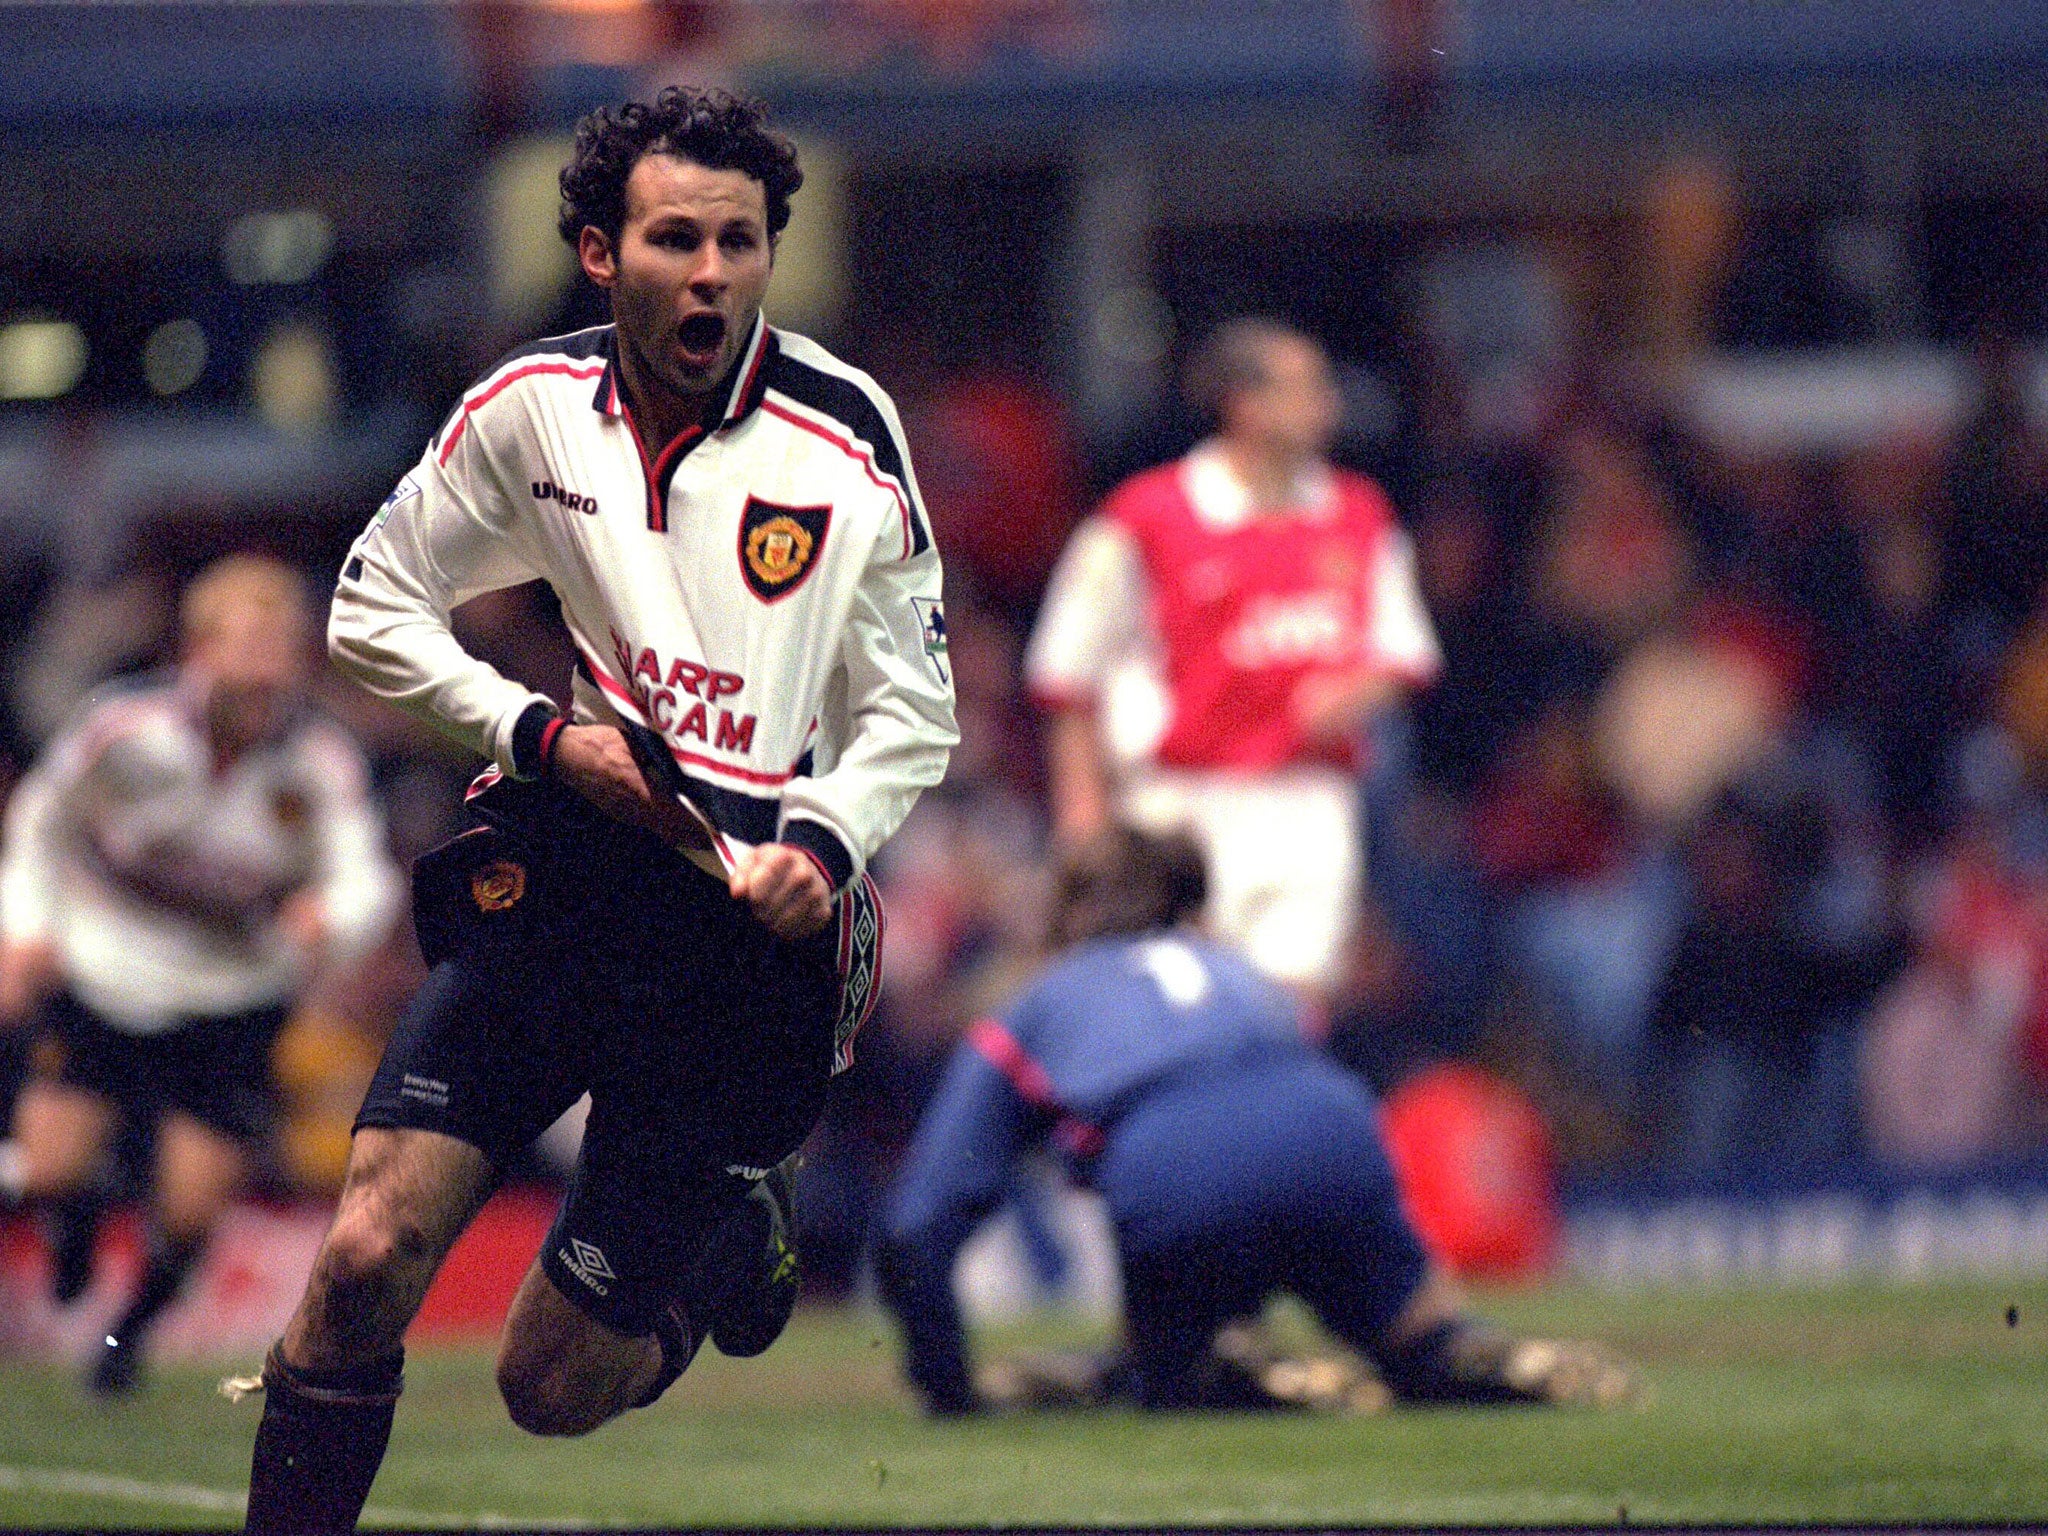 Ryan Giggs celebrates scoring the magnificent winning goal for Man Utd as they defeated Arsenal 2-1 in extra time during the 1999 FA Cup Semifinal Replay at Villa Park